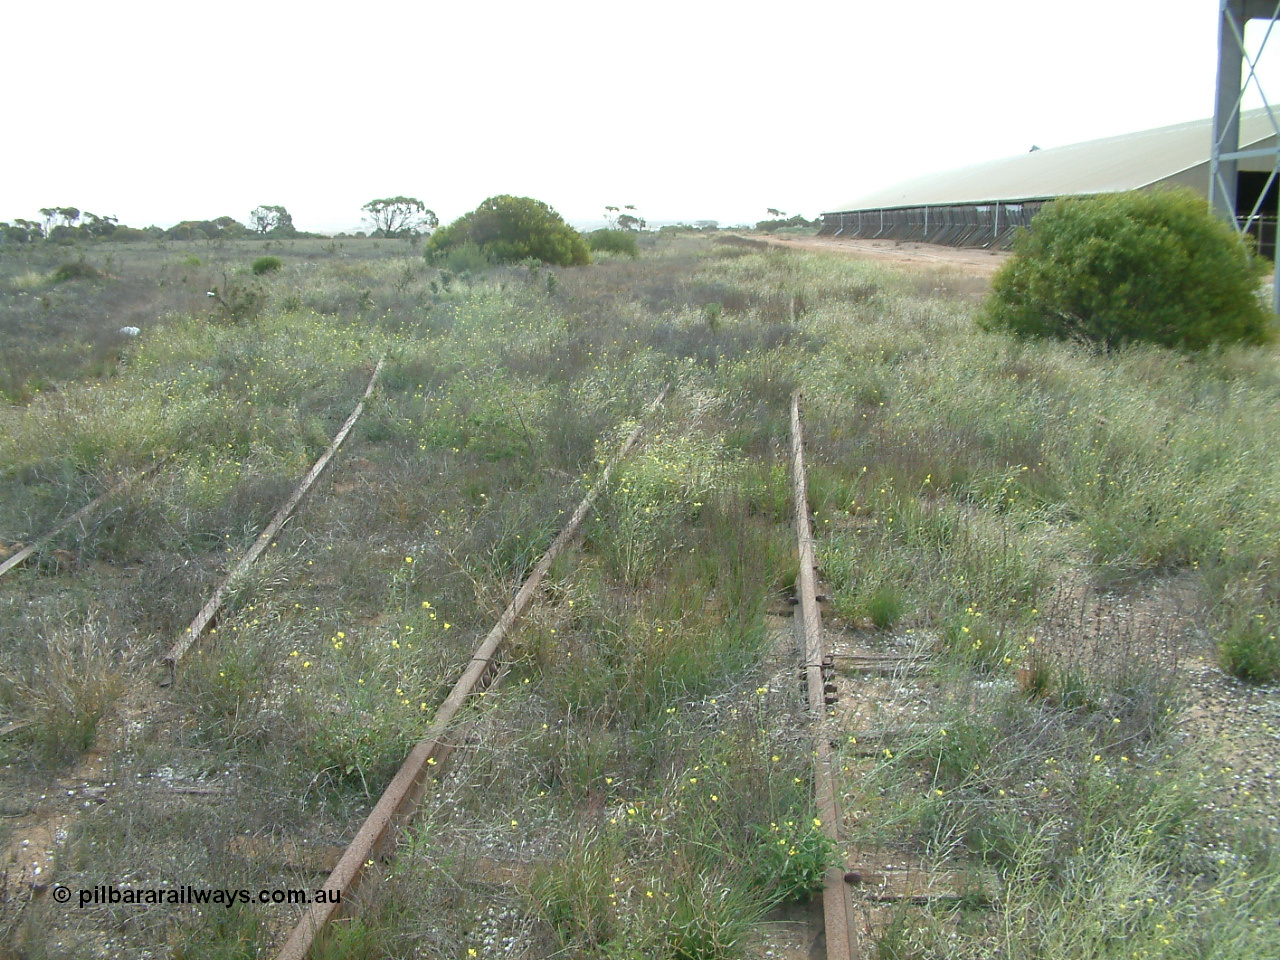 030414 154211
Penong, yard view looking west with the east leg of the triangle visible curving to the left, goods loop curving right to join the 'mainline' which is under the shrub.
